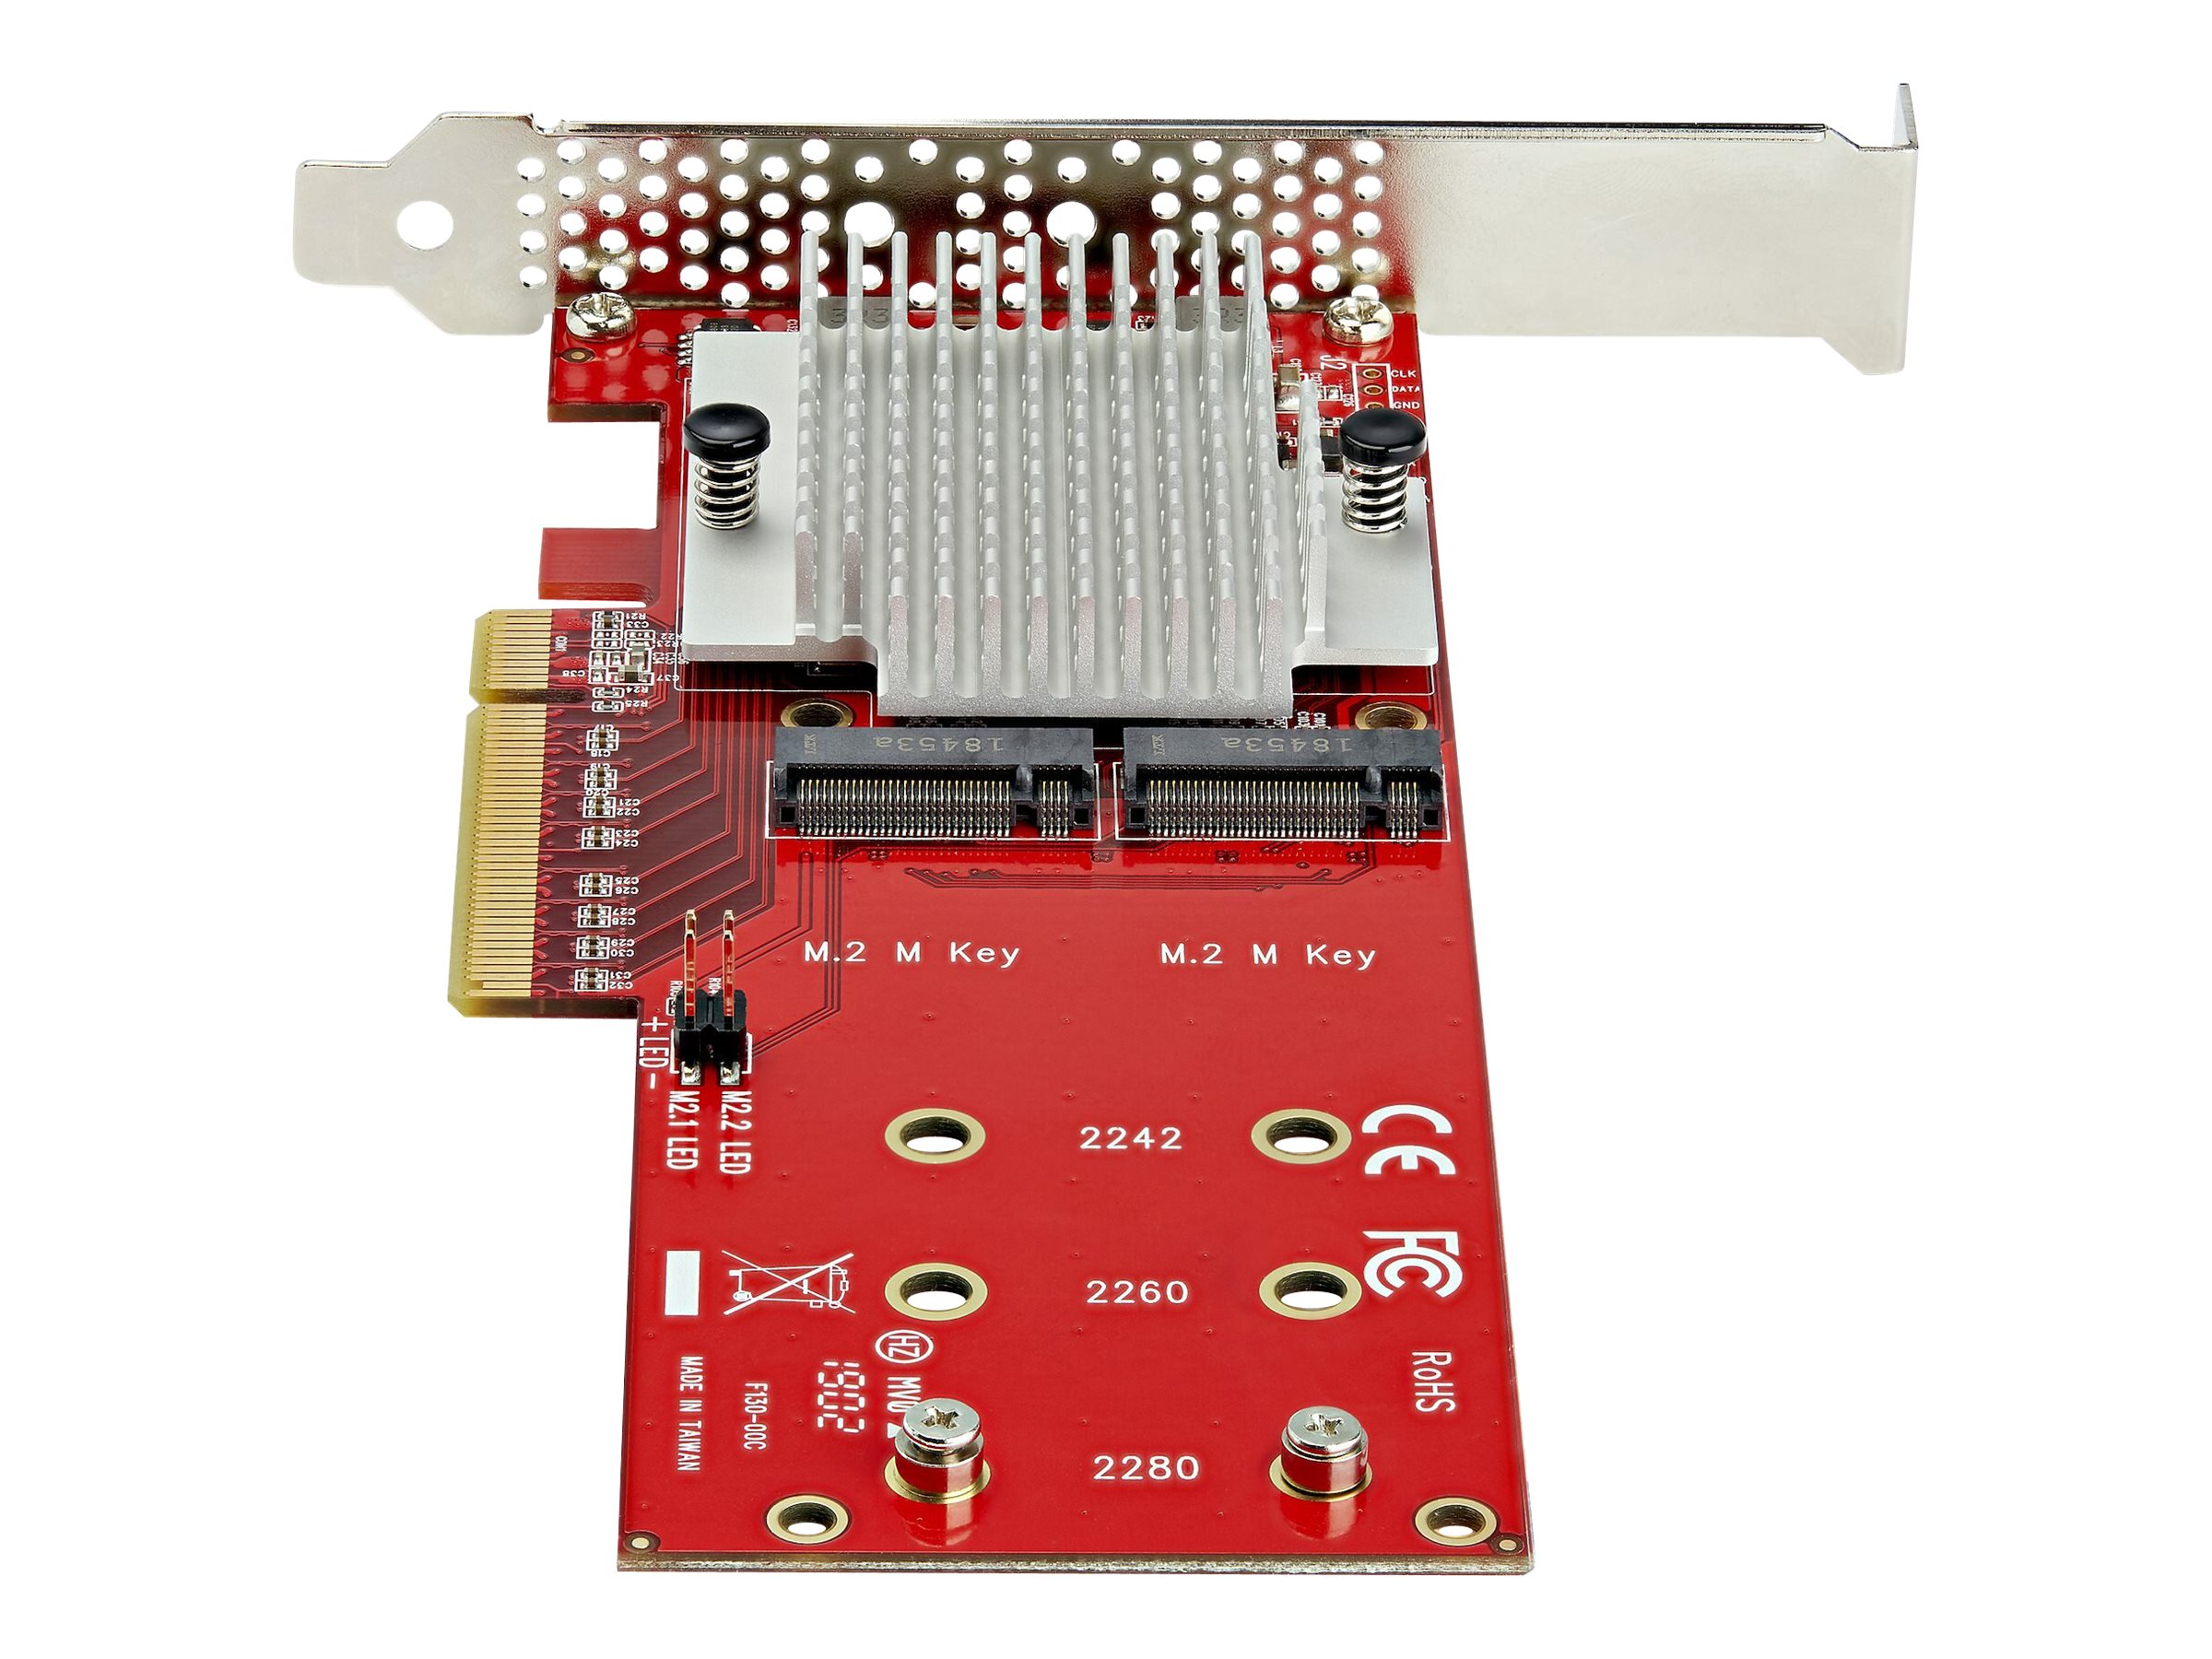 Beschrijving Verenigde Staten van Amerika Sanctie Buy StarTech.com Dual M.2 PCIe SSD Adapter Card - x8 x16 NVMe or at  Connection Public Sector Solutions